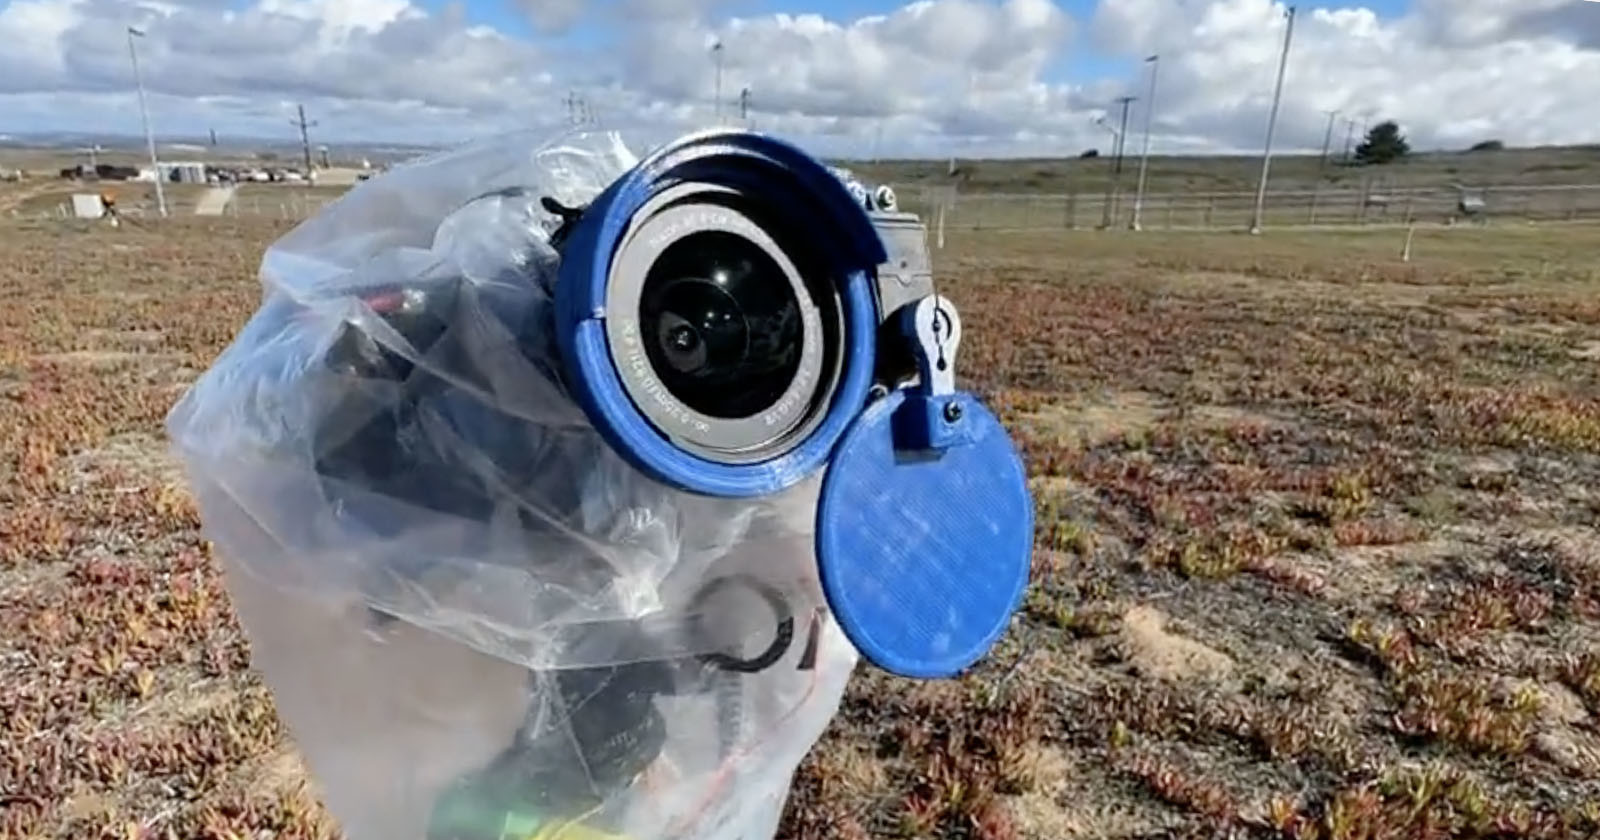 Photographers Automatic Lens Cap Shields Camera During Rocket Launches